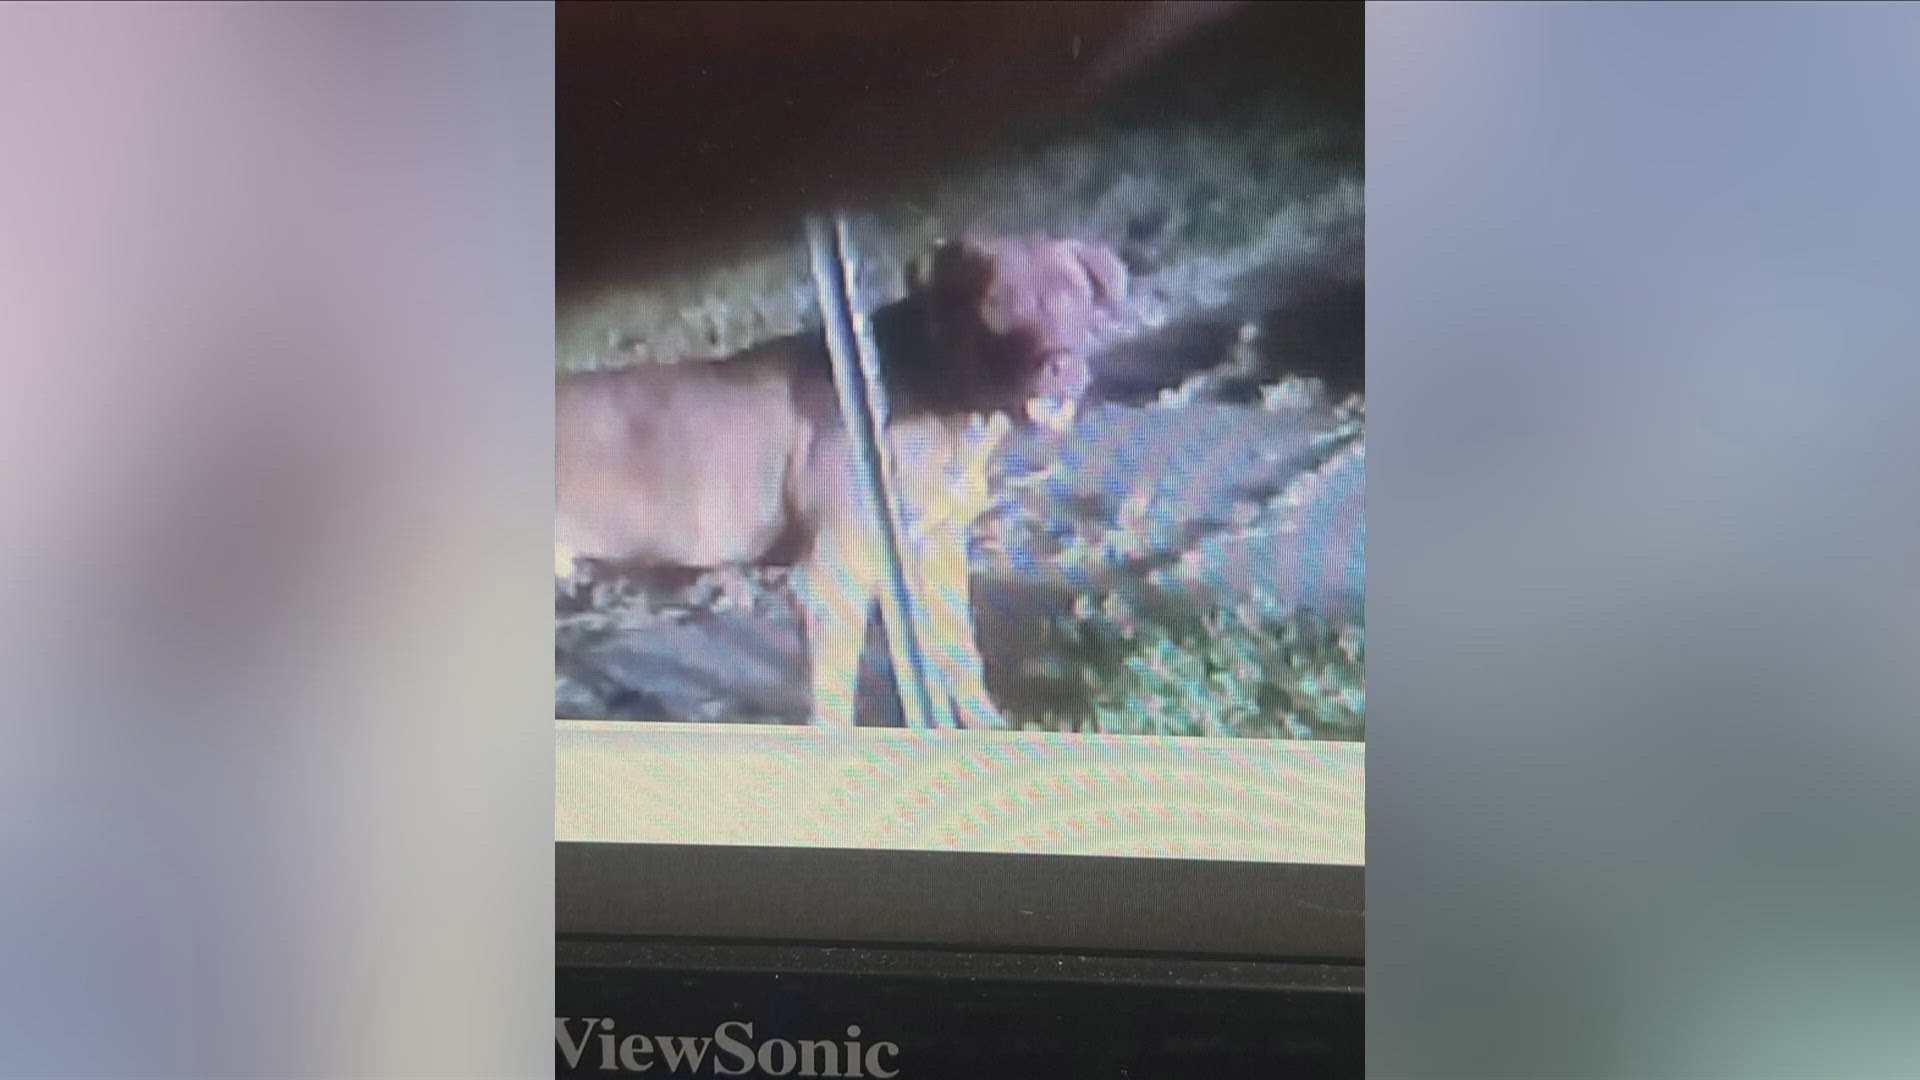 Bolivar, Tennessee, Police said as of Tuesday morning, both dogs involved in the attack have been captured.